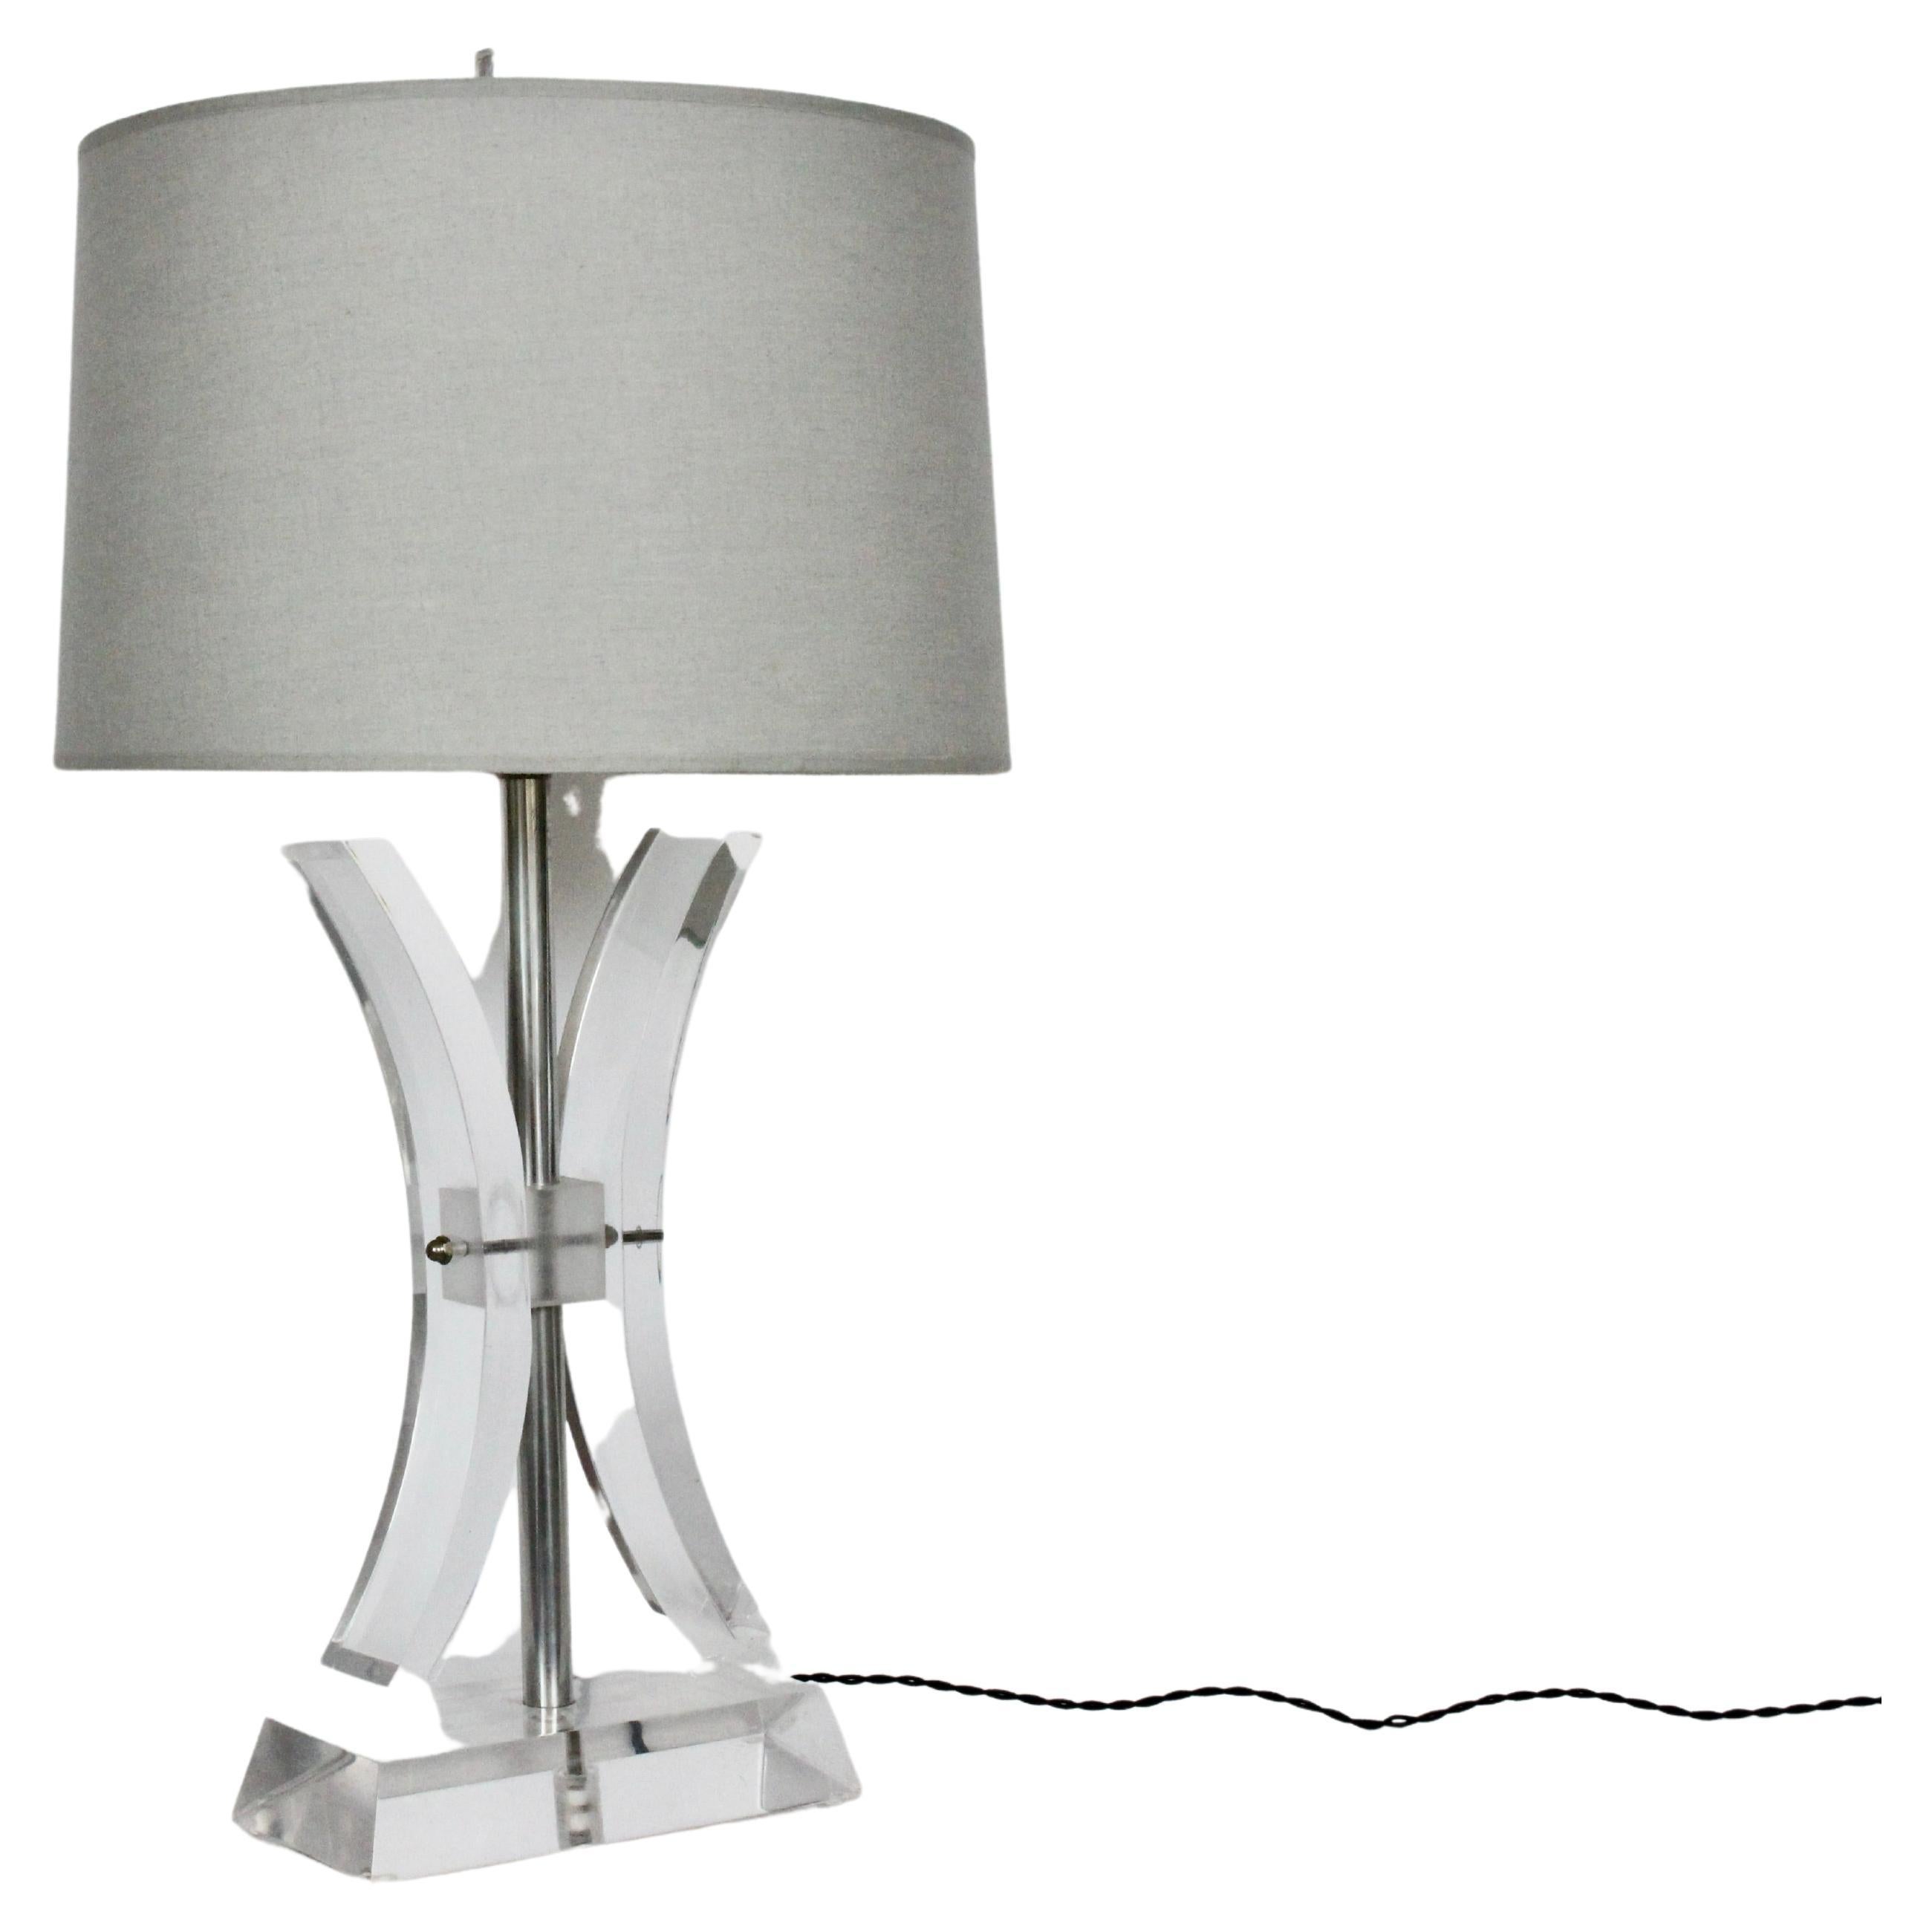 Herb Ritts attributed for Astrolite transparent Lucite & Chrome Two Fin table lamp. Featuring a Modernist hourglass form with central Chrome stem and central joint securing two curved, flared Acrylic swags, atop a (5D x 10W x 2H) angled rectangular